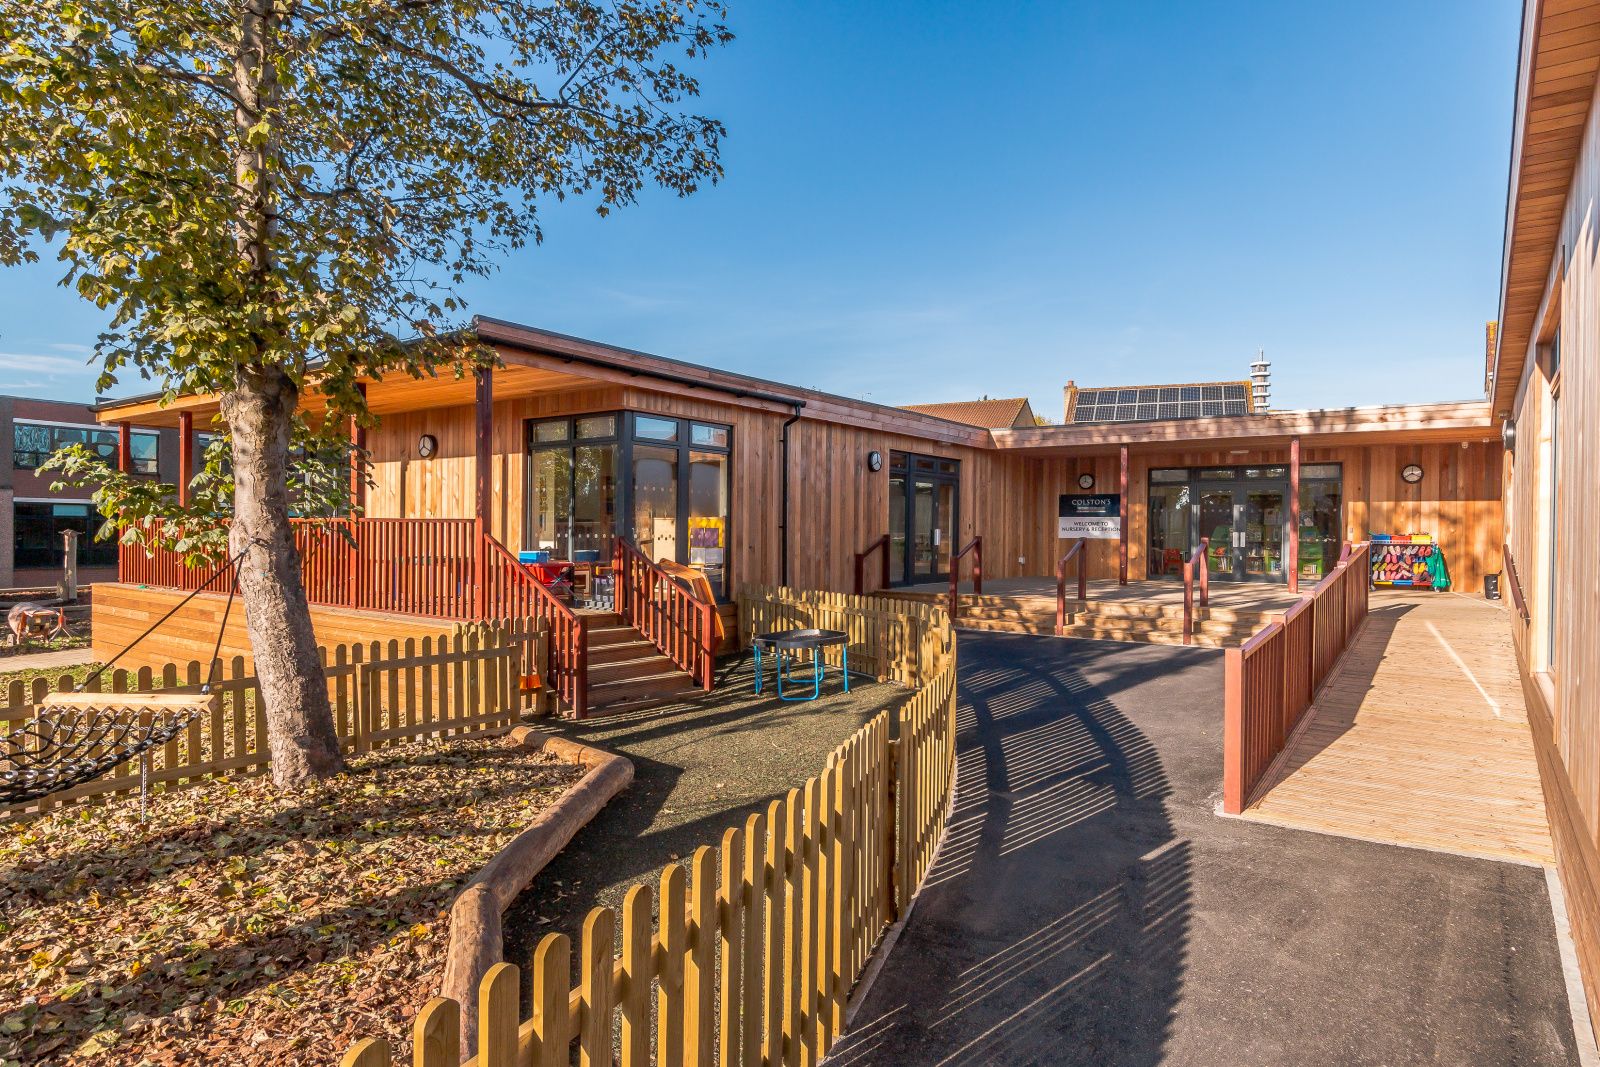 Early Years Eco Building at Colston’s Independent Lower School in Bristol